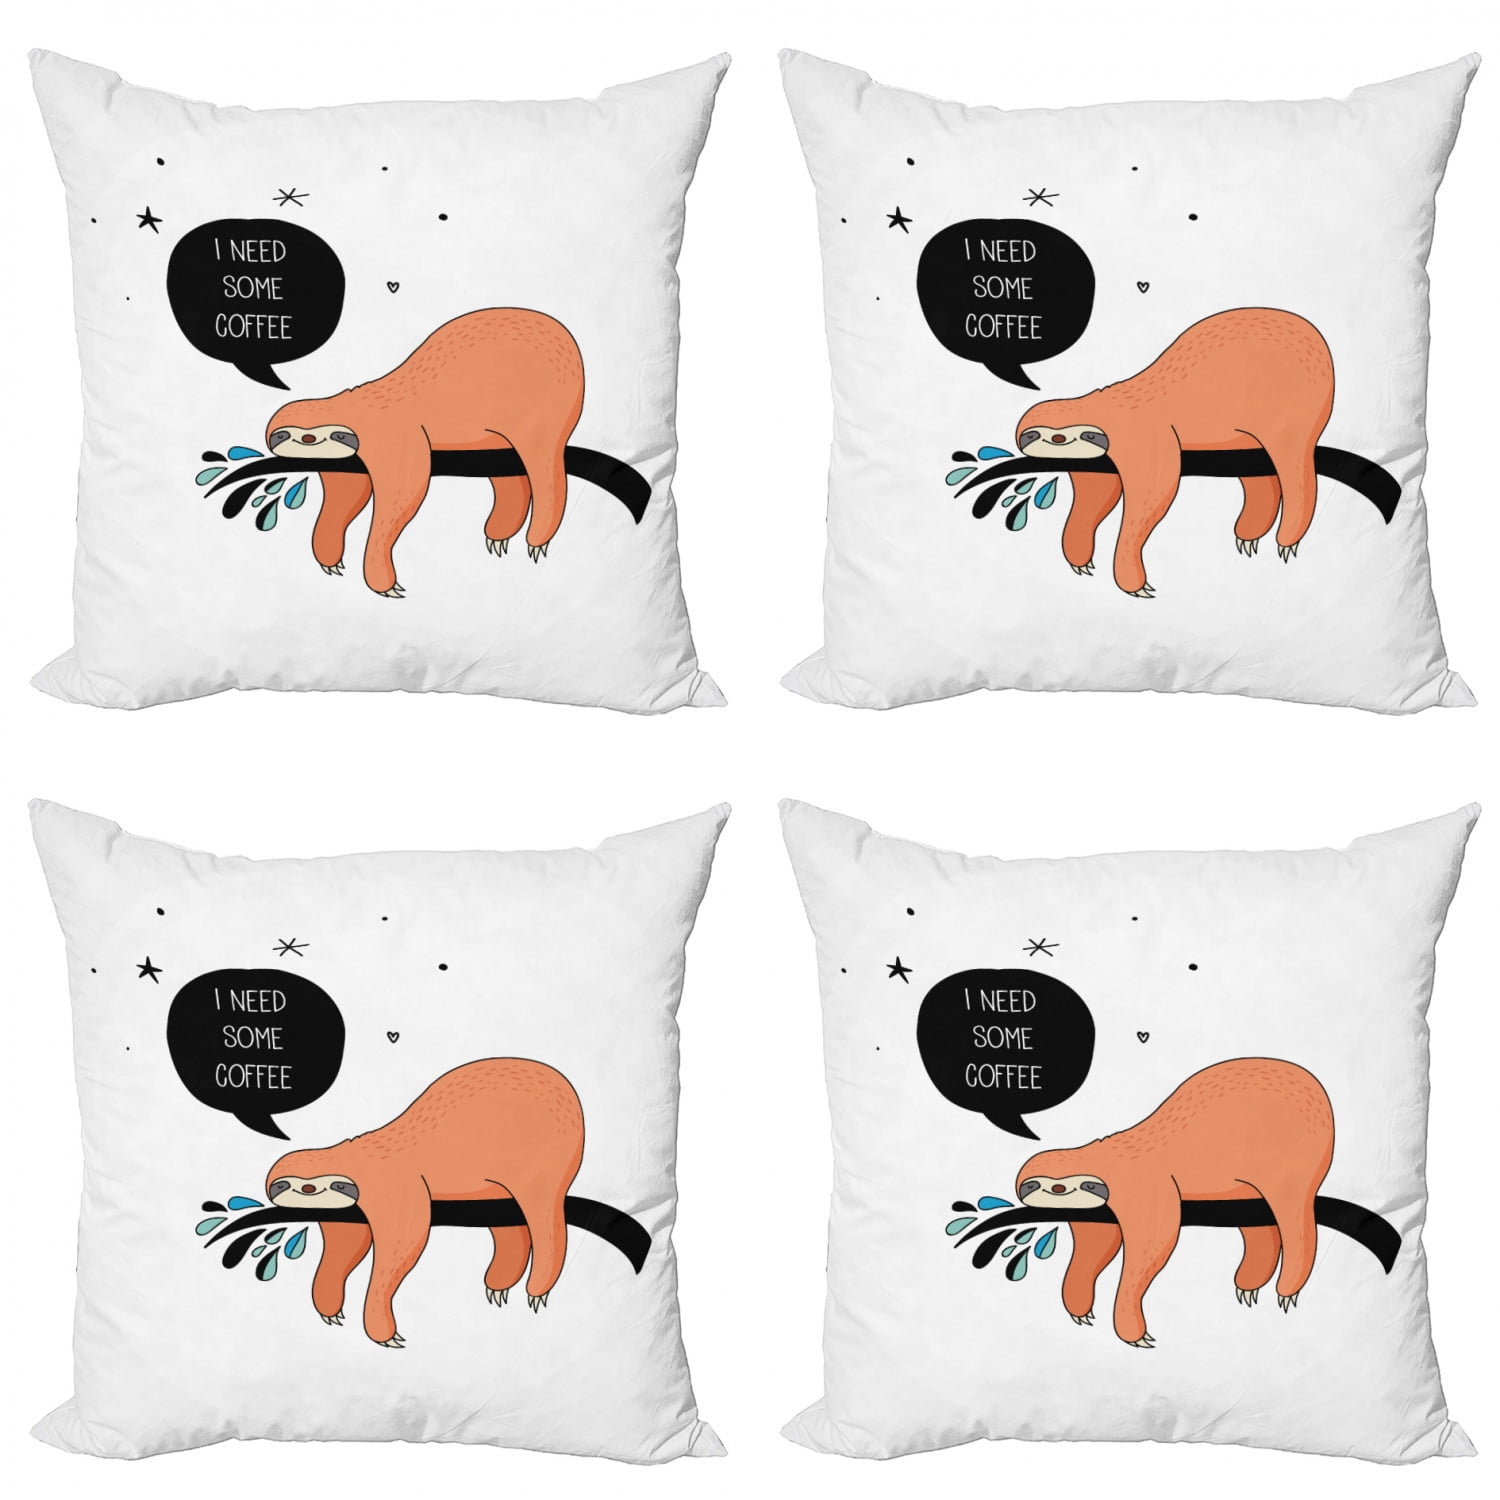 Multicolor Absolutely Cool Animal & Animal Fun Designs Comic Horse Animal Love Riding Throw Pillow 18x18